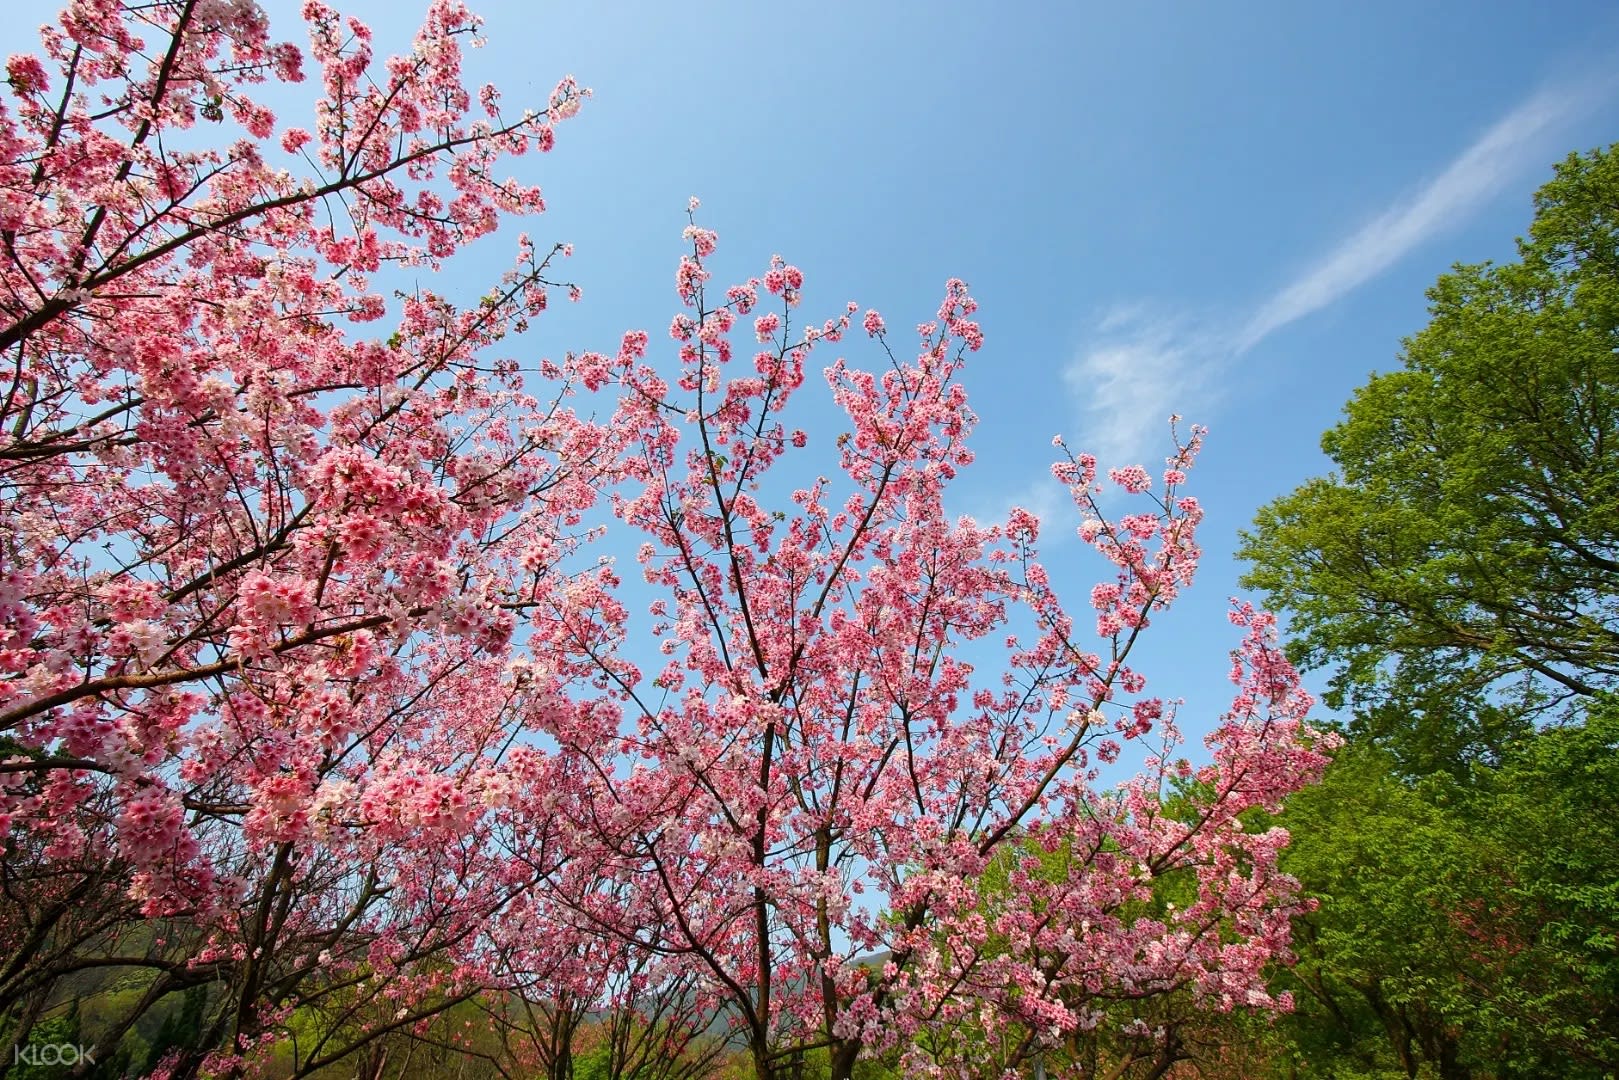 The vivid colour of cherry blossom blooming under blue sky in Taiwan brings about refreshing and joyful feelings